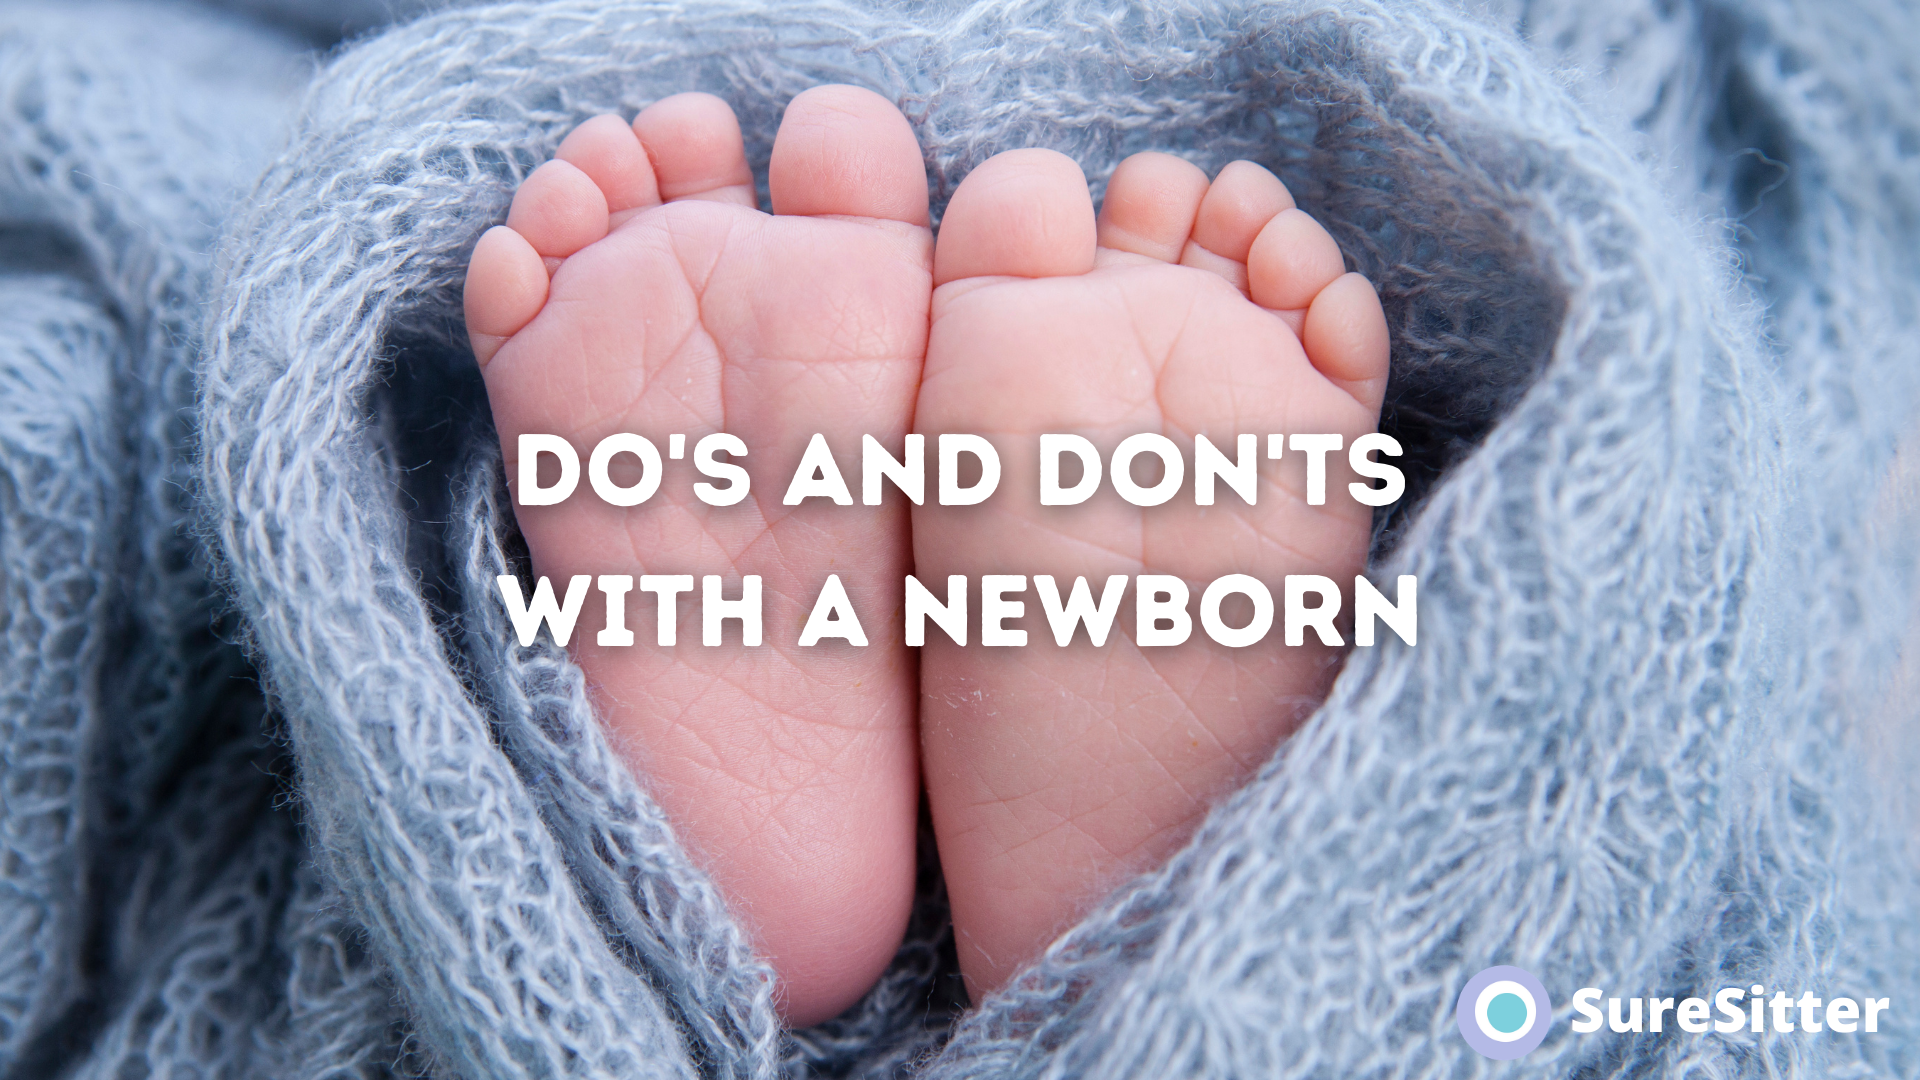 Caring for your newborn baby